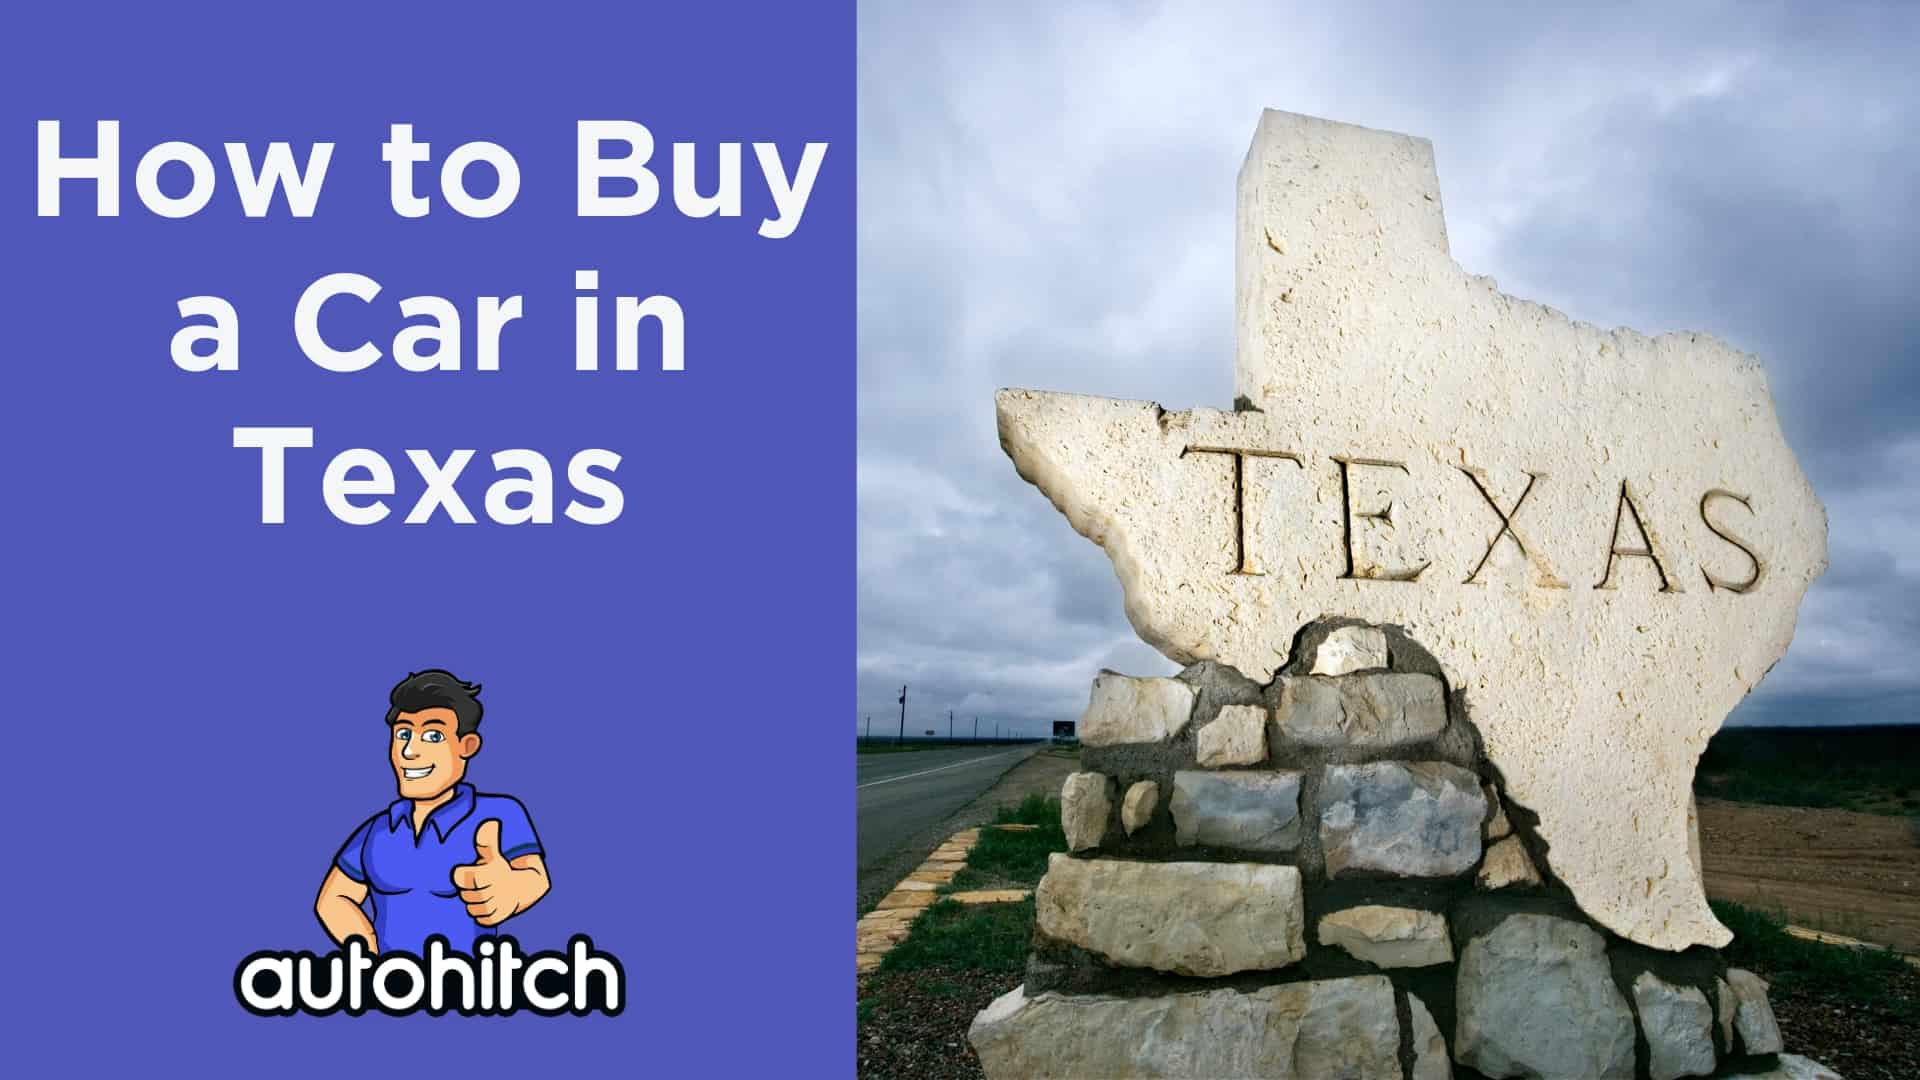 How to Buy a Car in Texas